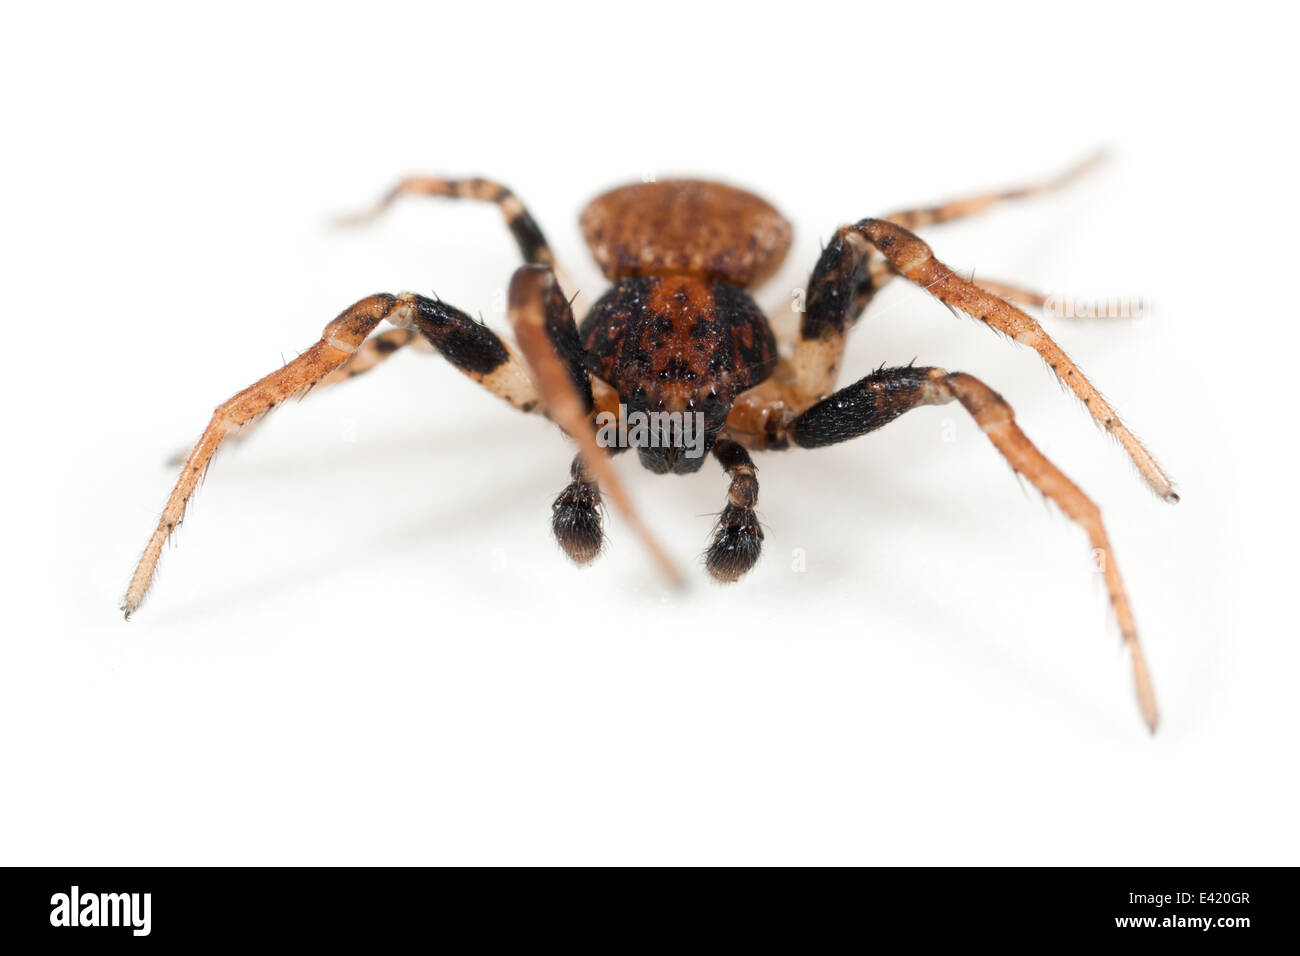 Male Ozyptila praticola spider, part of the family Thomisidae - Crab spiders. Isolated on white background. Stock Photo